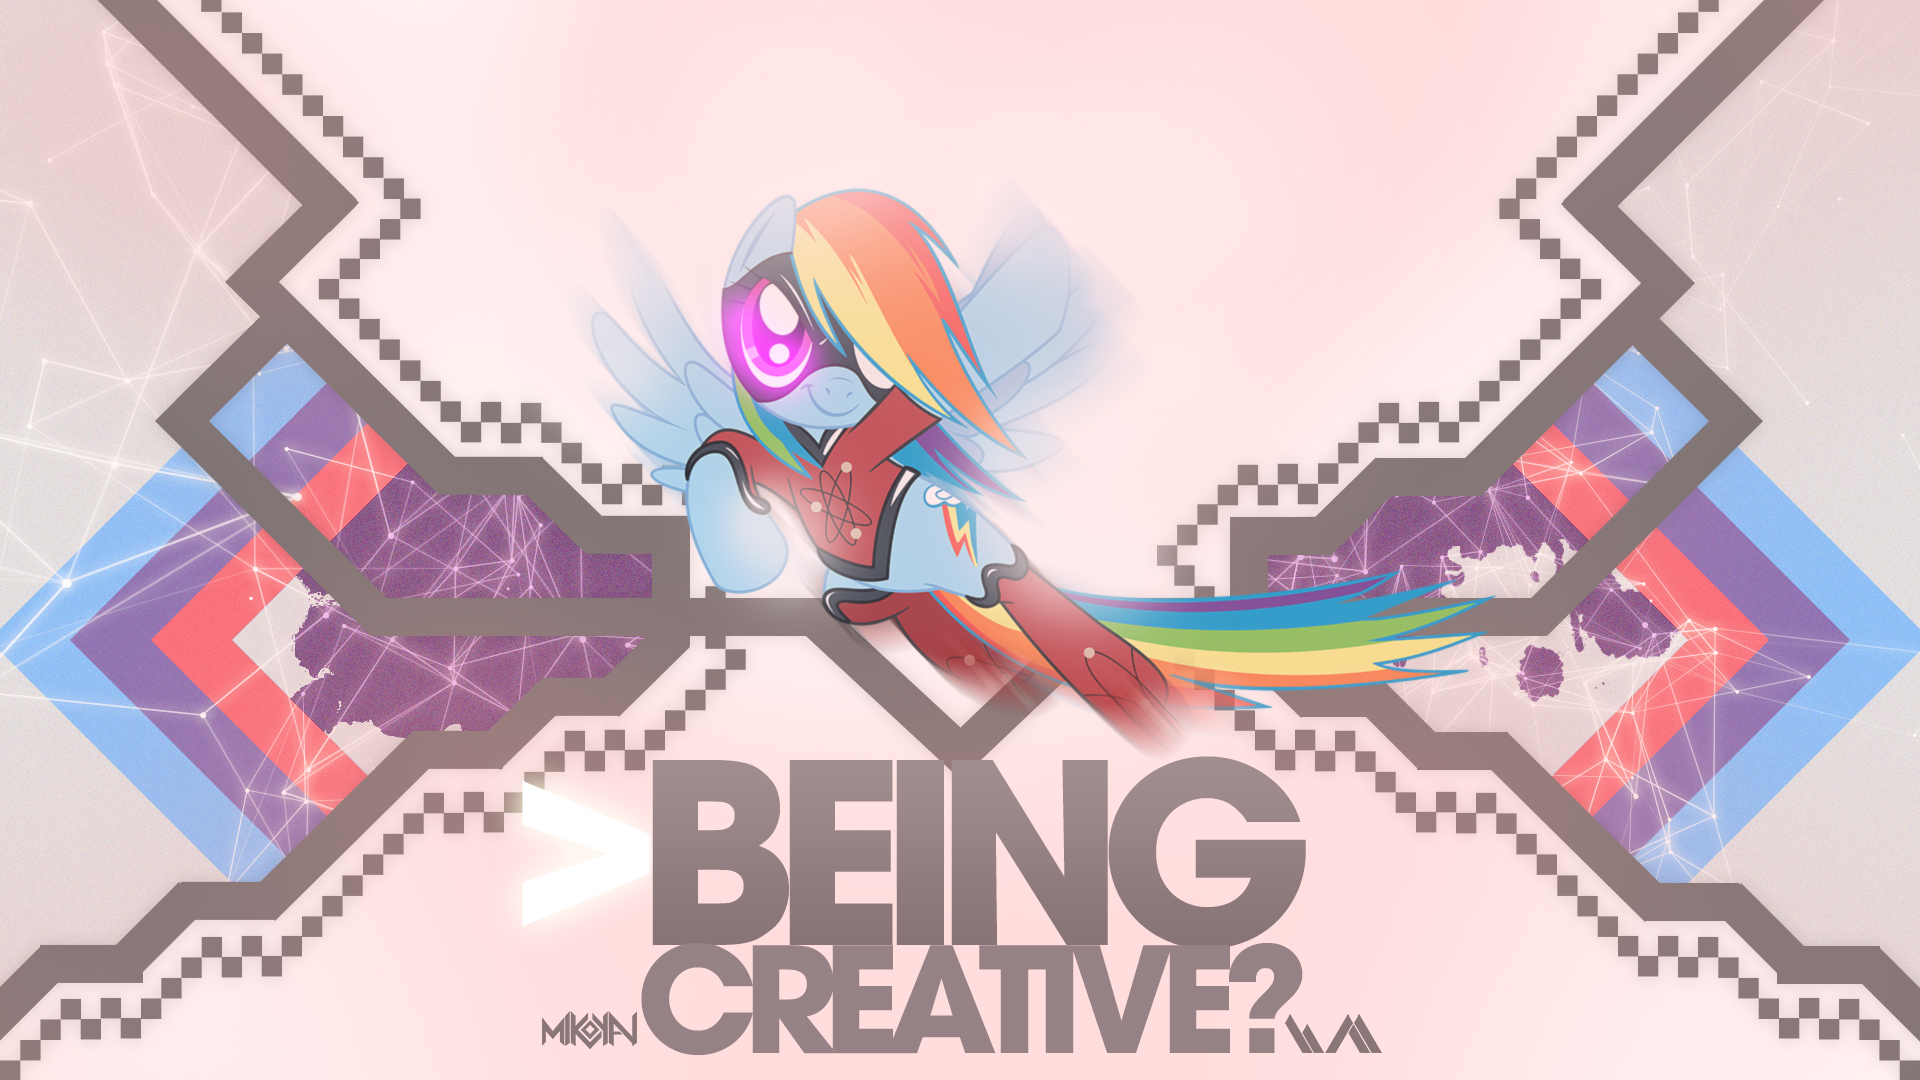 WMill and Miko | Being Creative? by MarelynManson, MikoyaNx and WMill